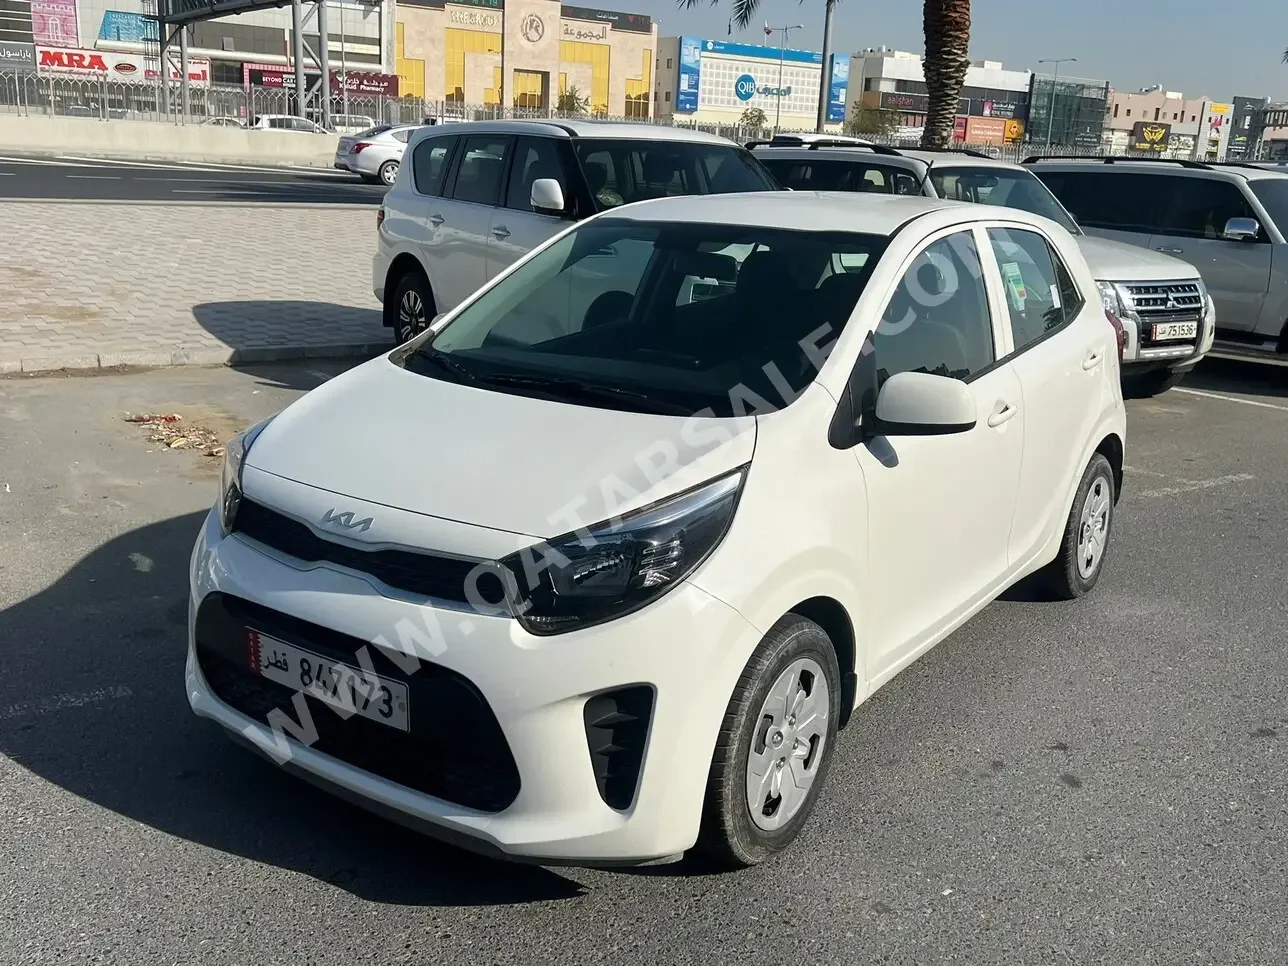 Kia  Picanto  2022  Automatic  33,000 Km  4 Cylinder  Front Wheel Drive (FWD)  Hatchback  White  With Warranty